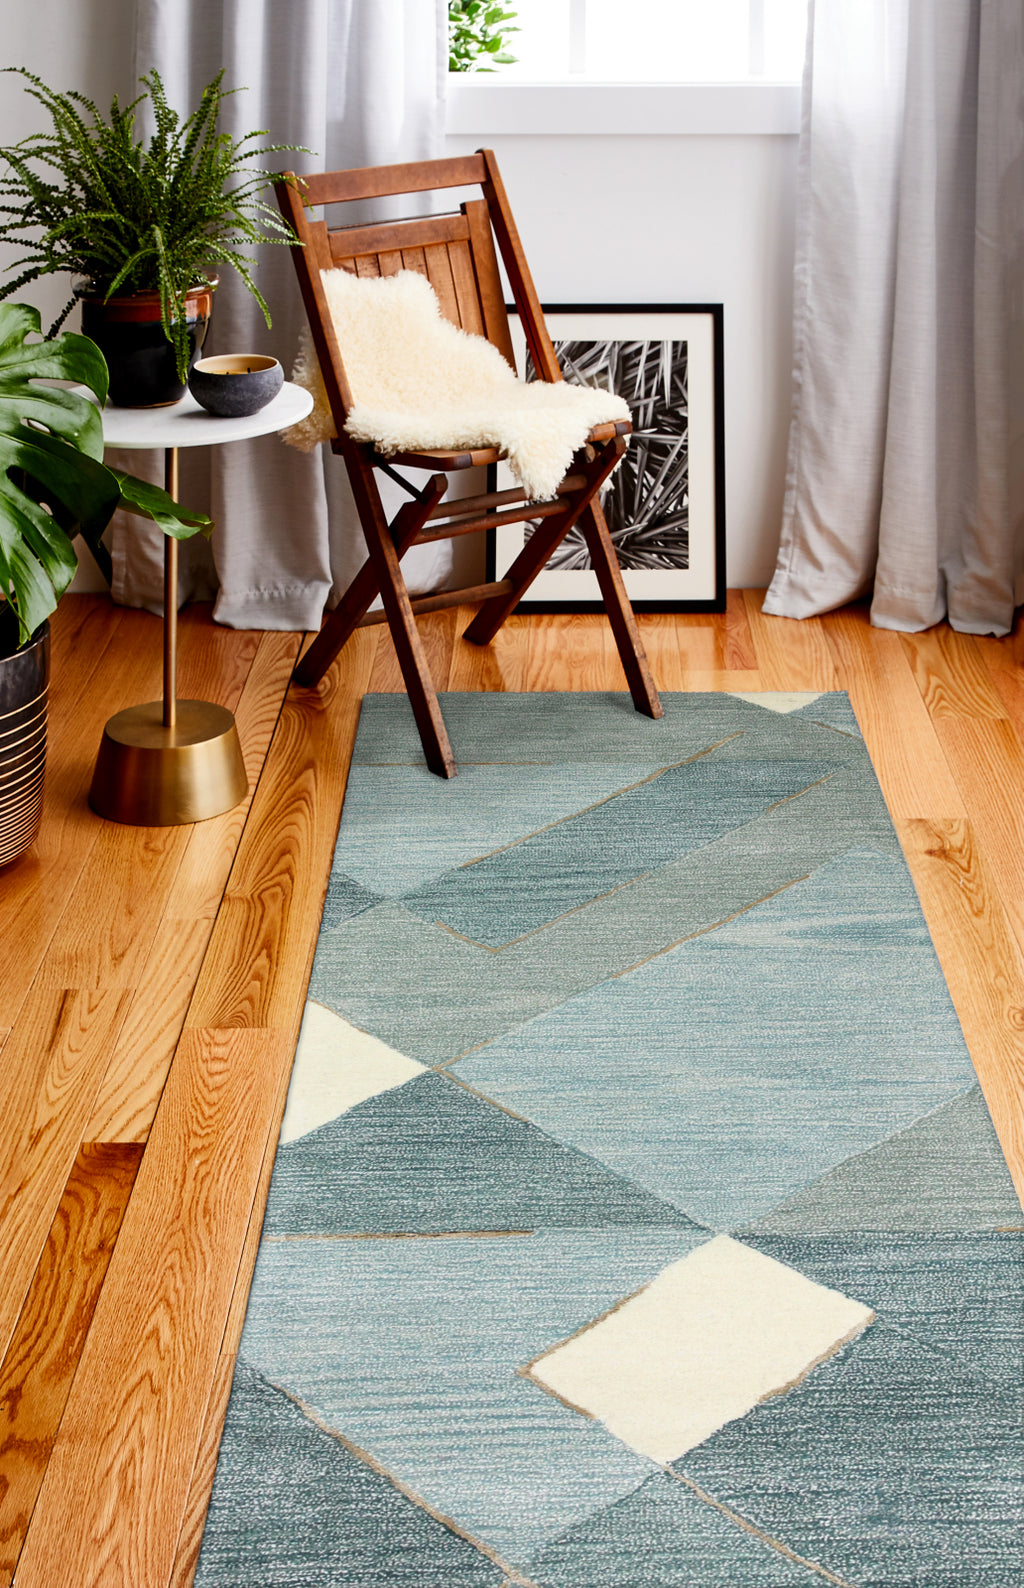 Bashian Greenwich R129-HG380 Area Rug Lifestyle Image Feature